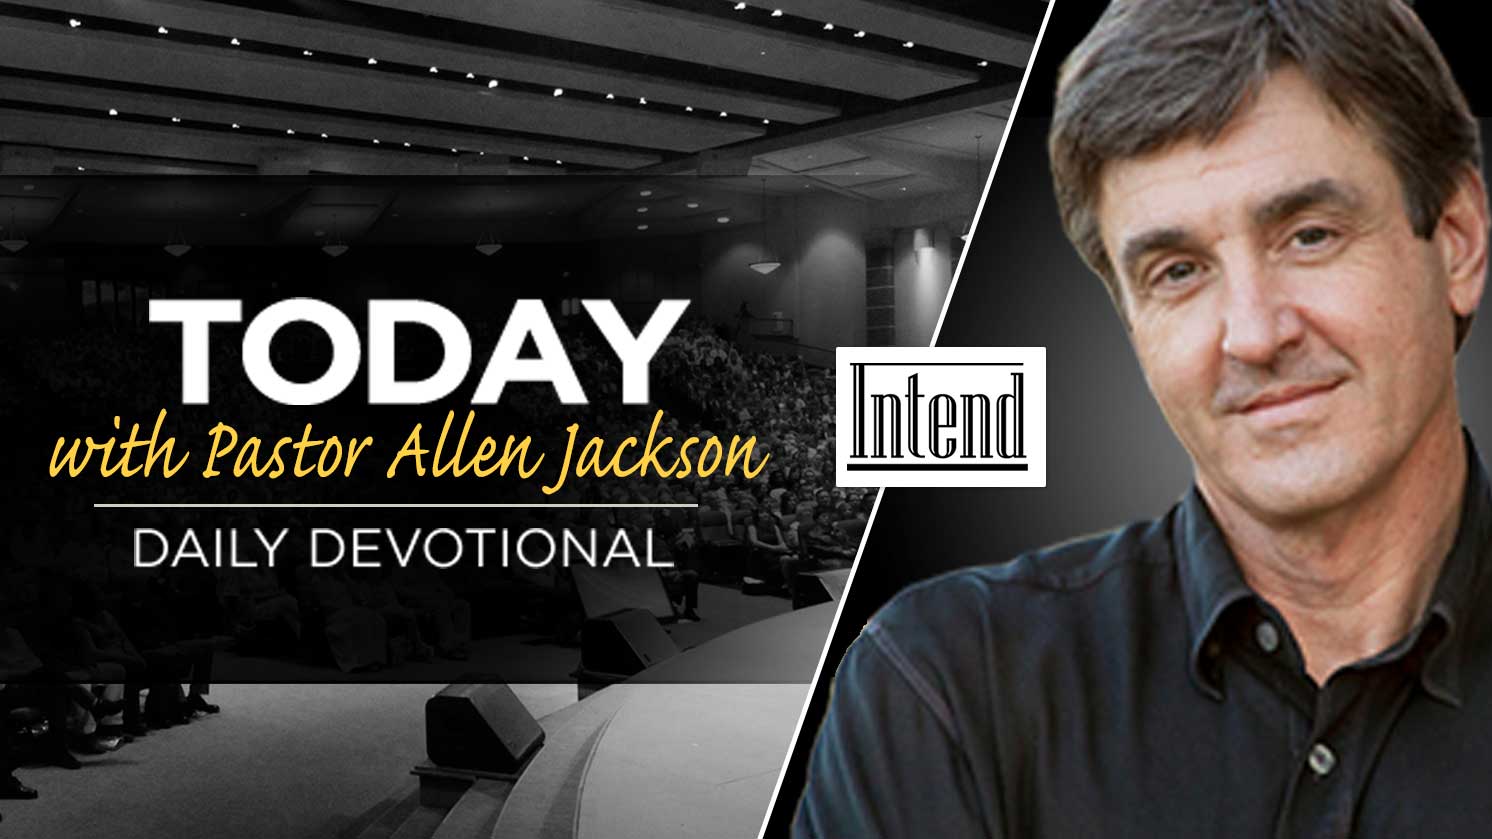 Today with Pastor Allen Jackson